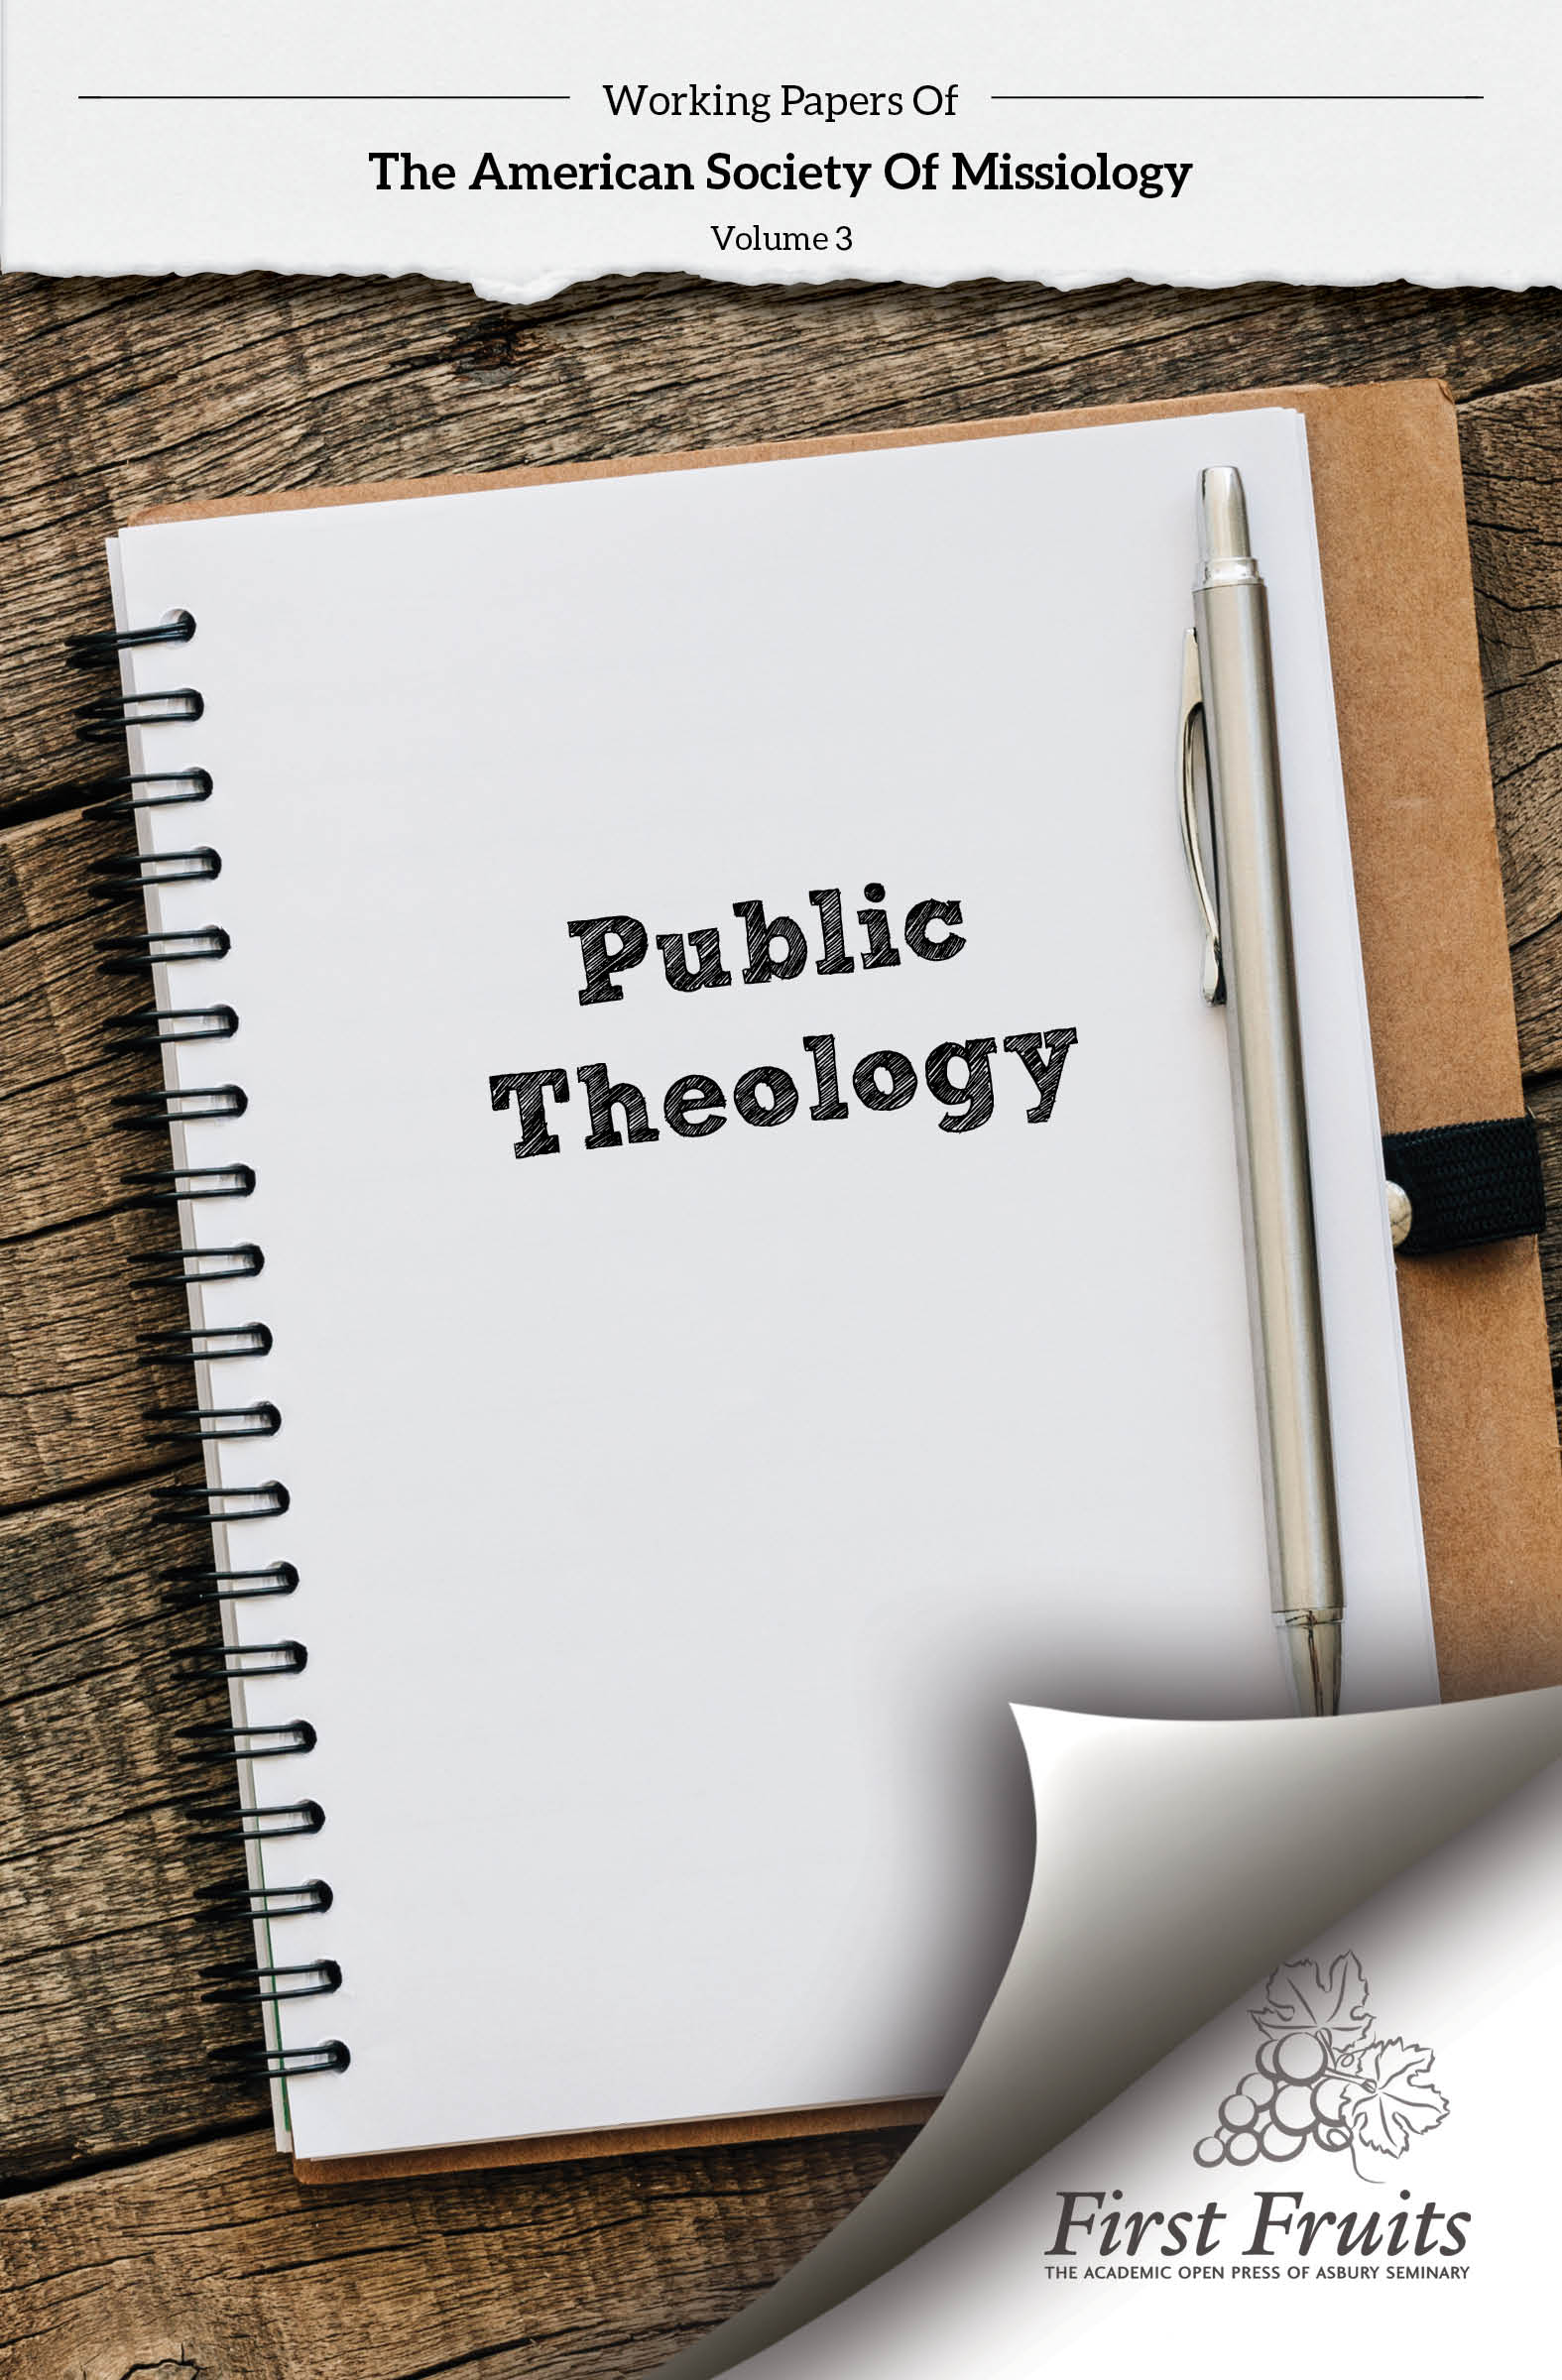 Working Papers of the American Society of Missiology; Vol. 3 Public Theology